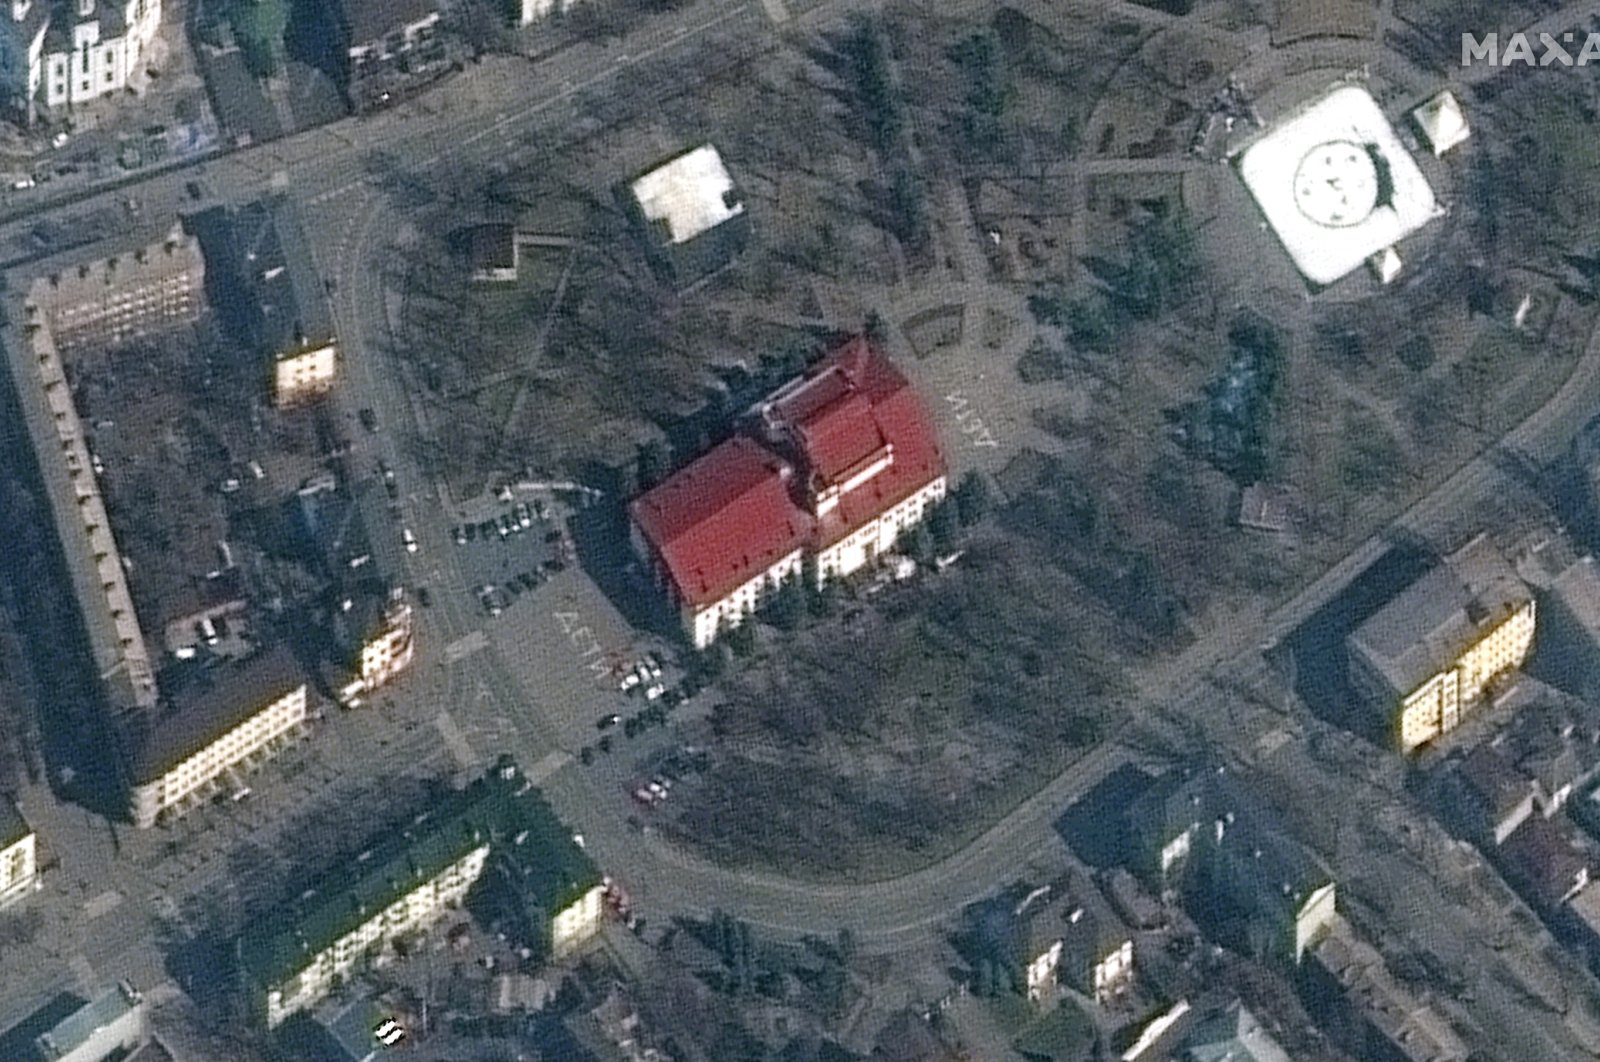 This satellite image provided by Maxar Technologies shows the Mariupol Drama Theater in Mariupol, Ukraine, March 14, 2022. (Maxar Technologies via AP)